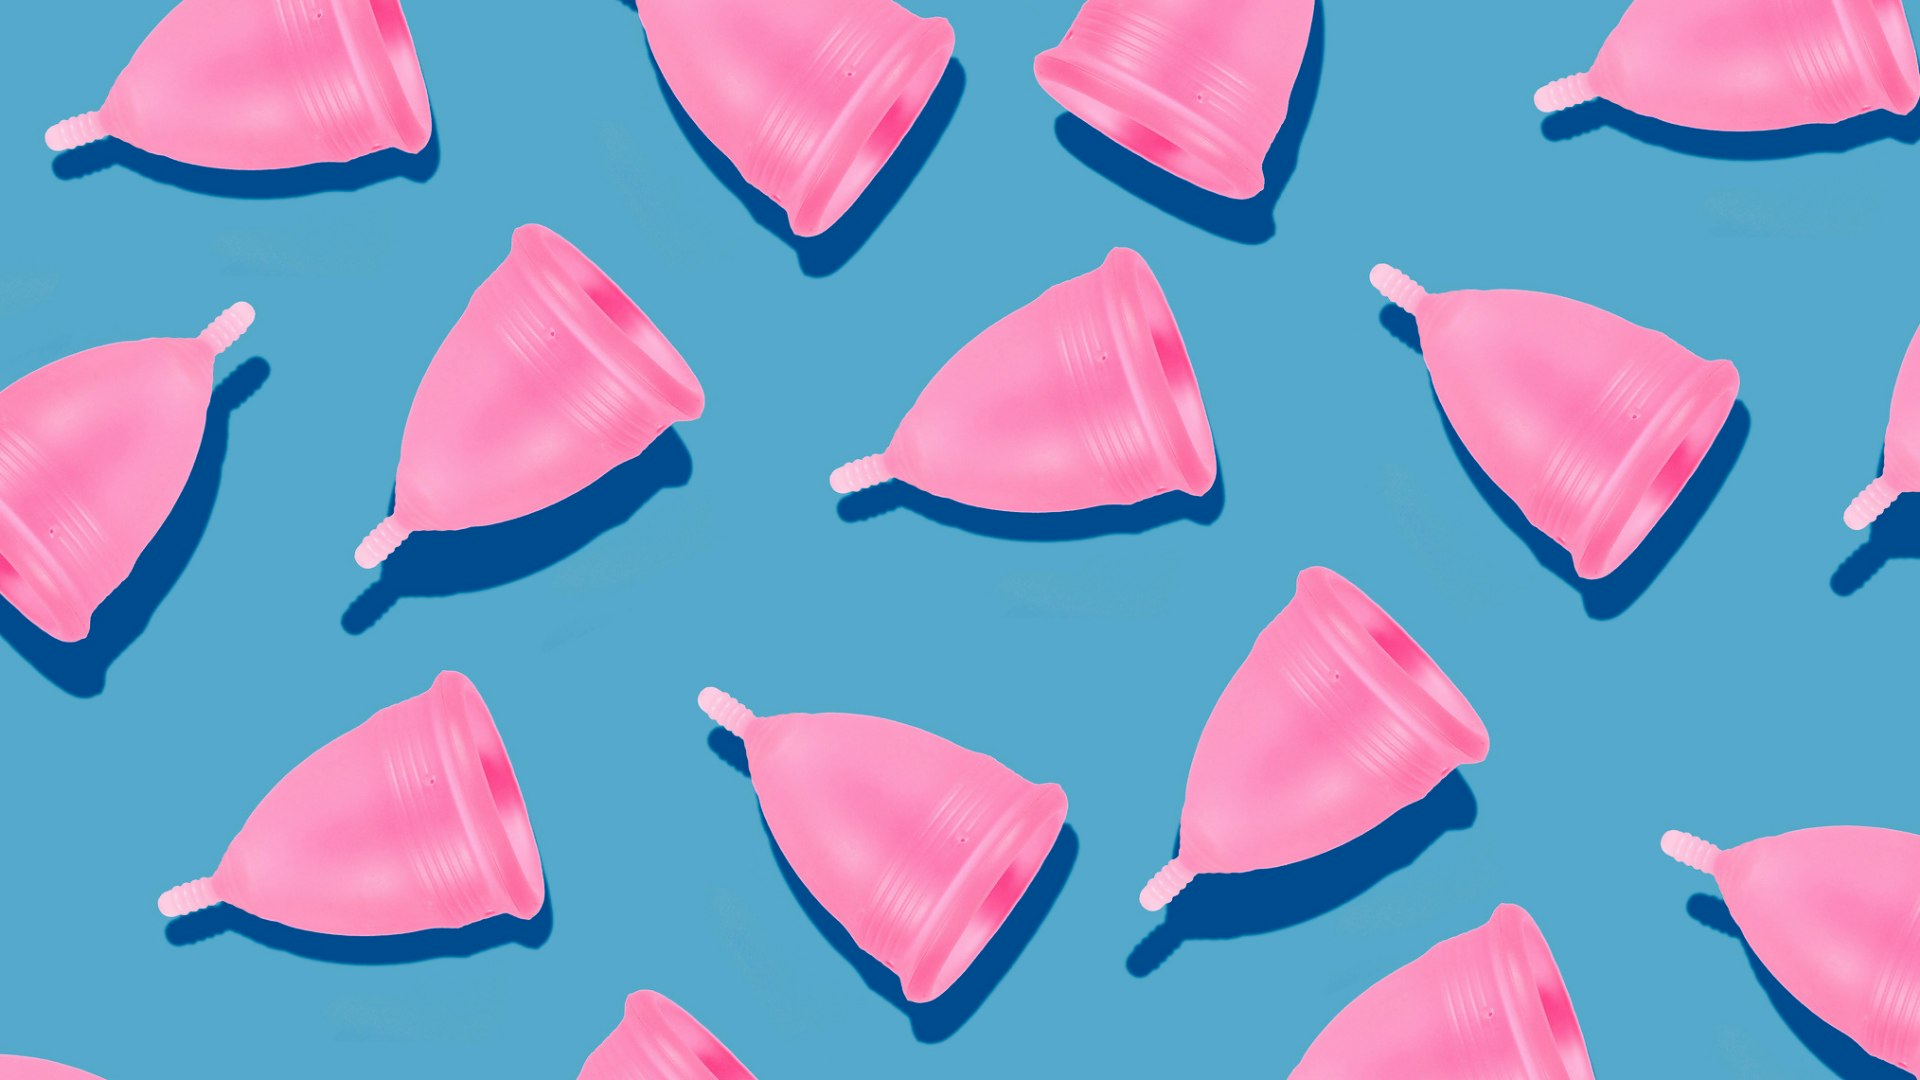 Menstrual cups not an option? Check out these biodegradable pads